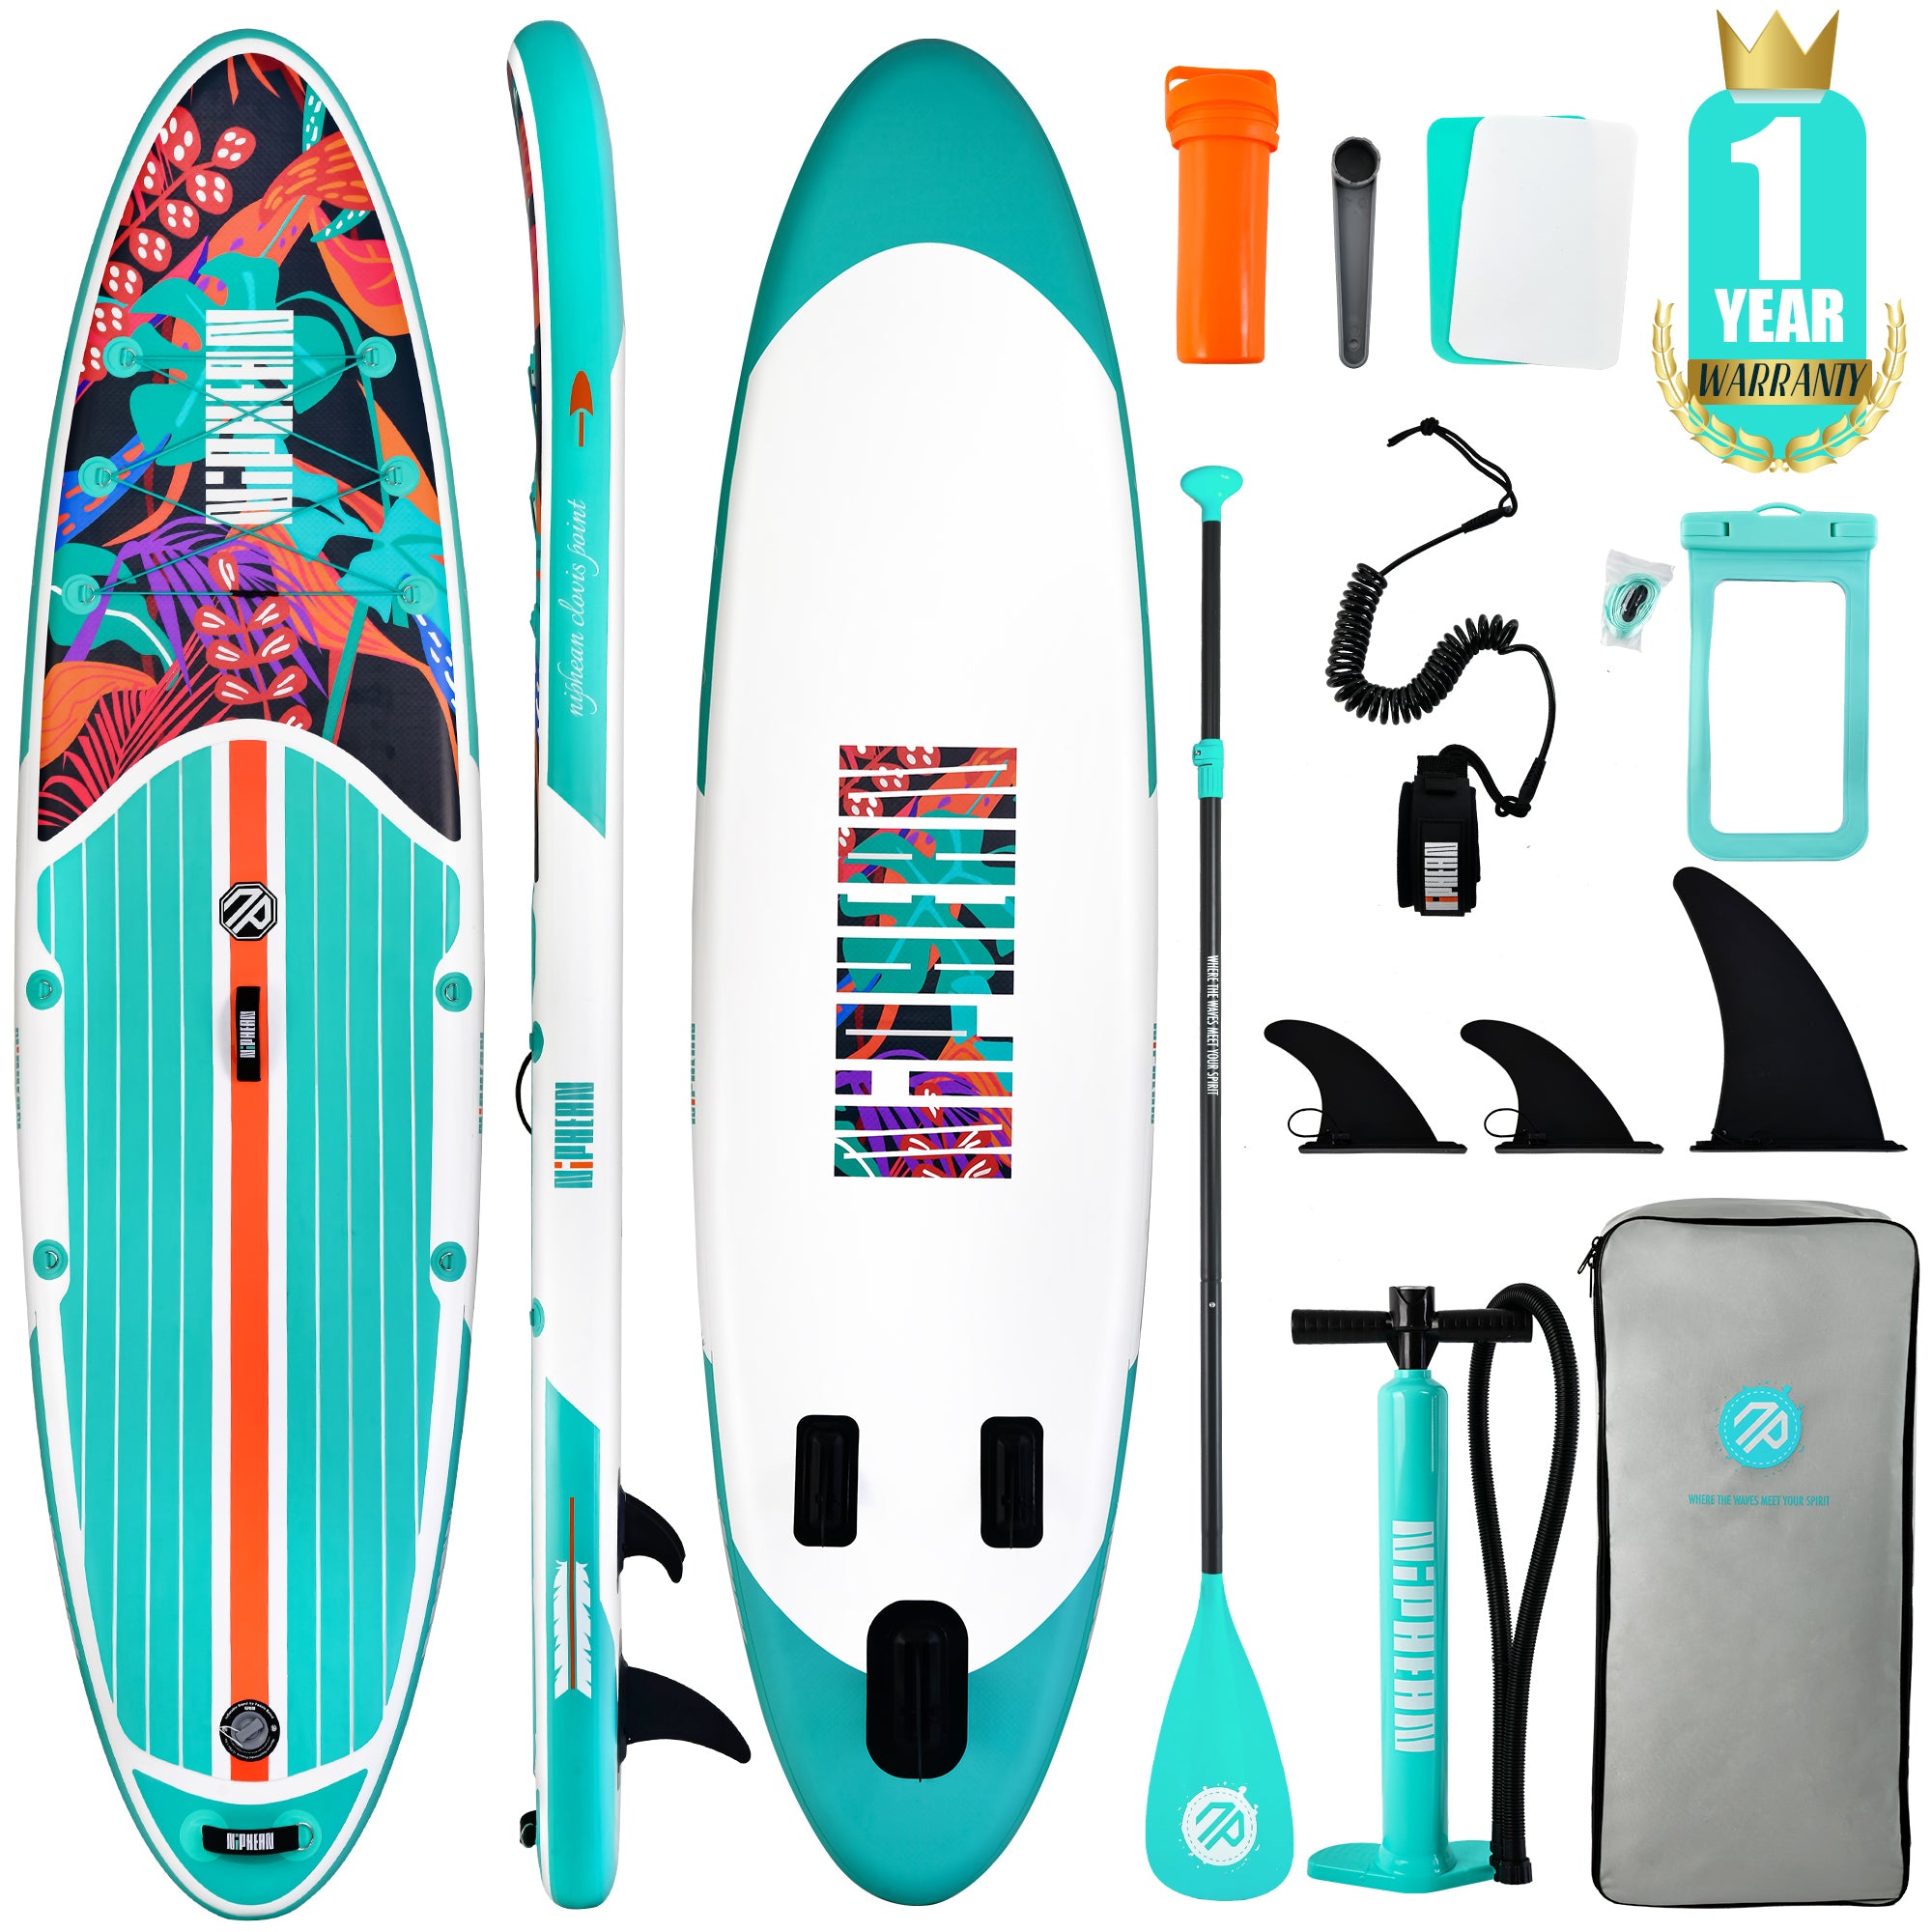 Niphean 10’6’’ Inflatable Stand Up Paddle Board 03A with SUP Accessori ...